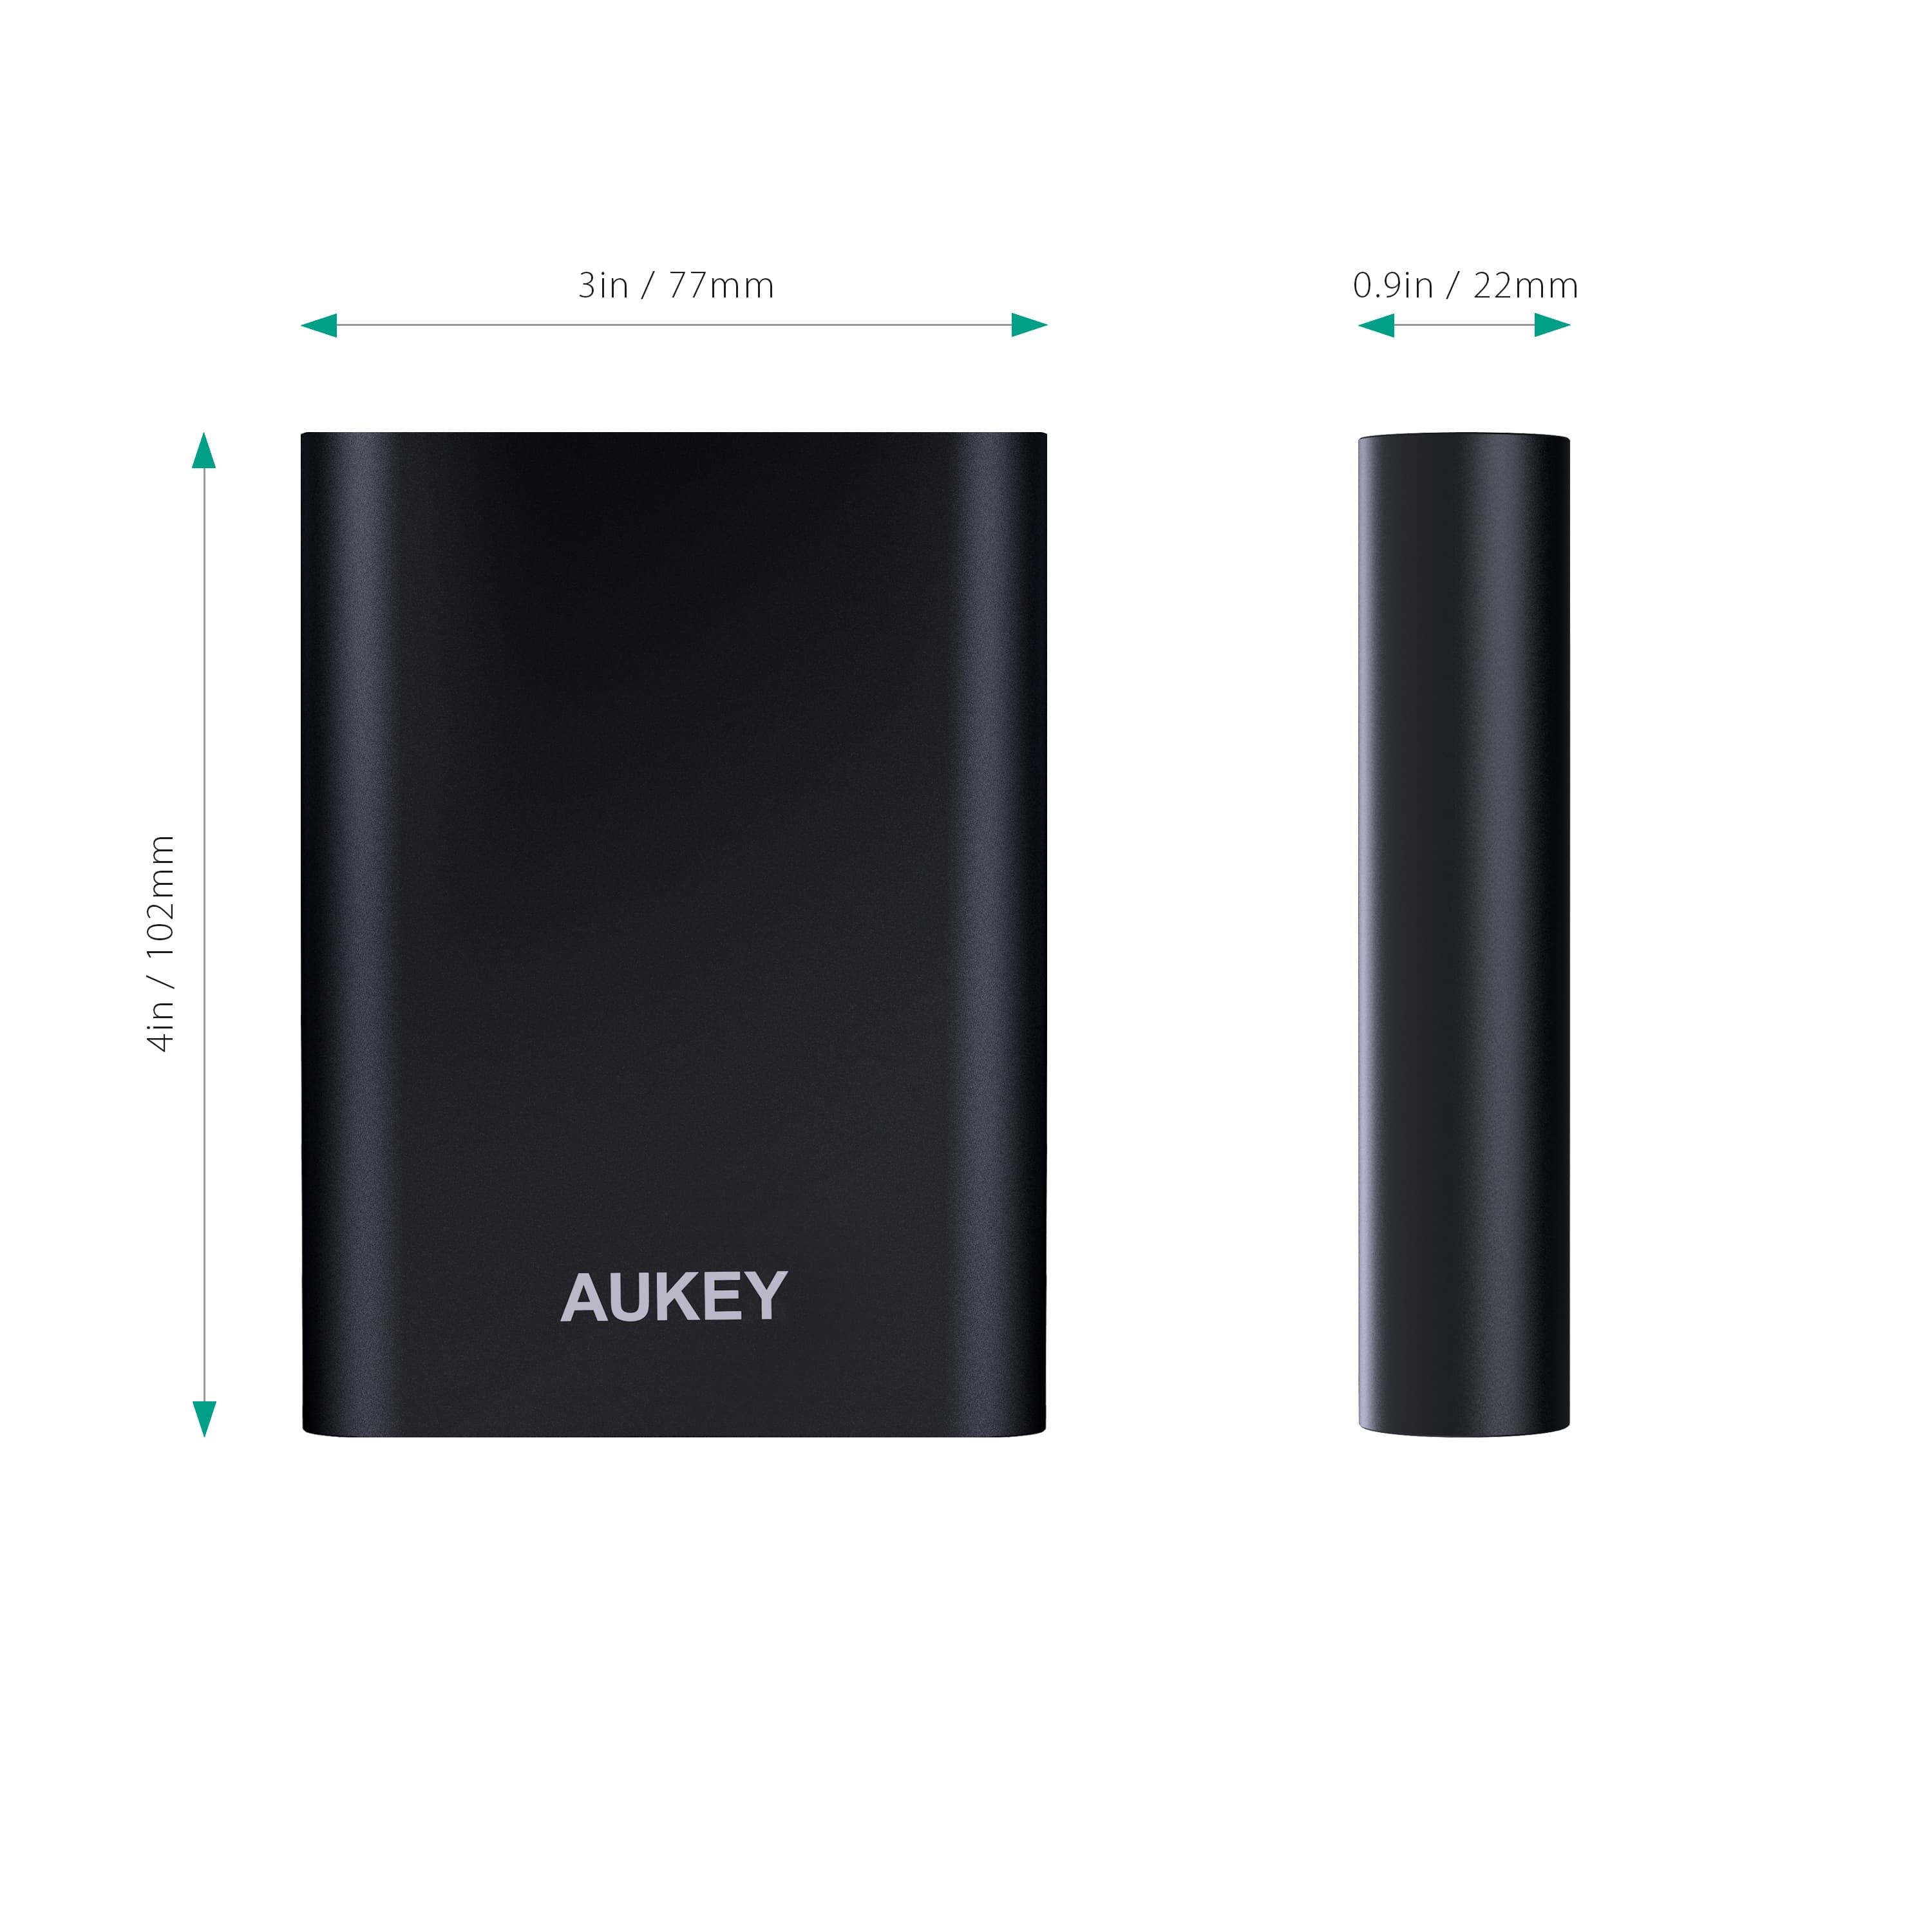 AUKEY PB-AT1 10400mAh Power Bank with Qualcomm Quick Charge 3.0 - Aukey Malaysia Official Store